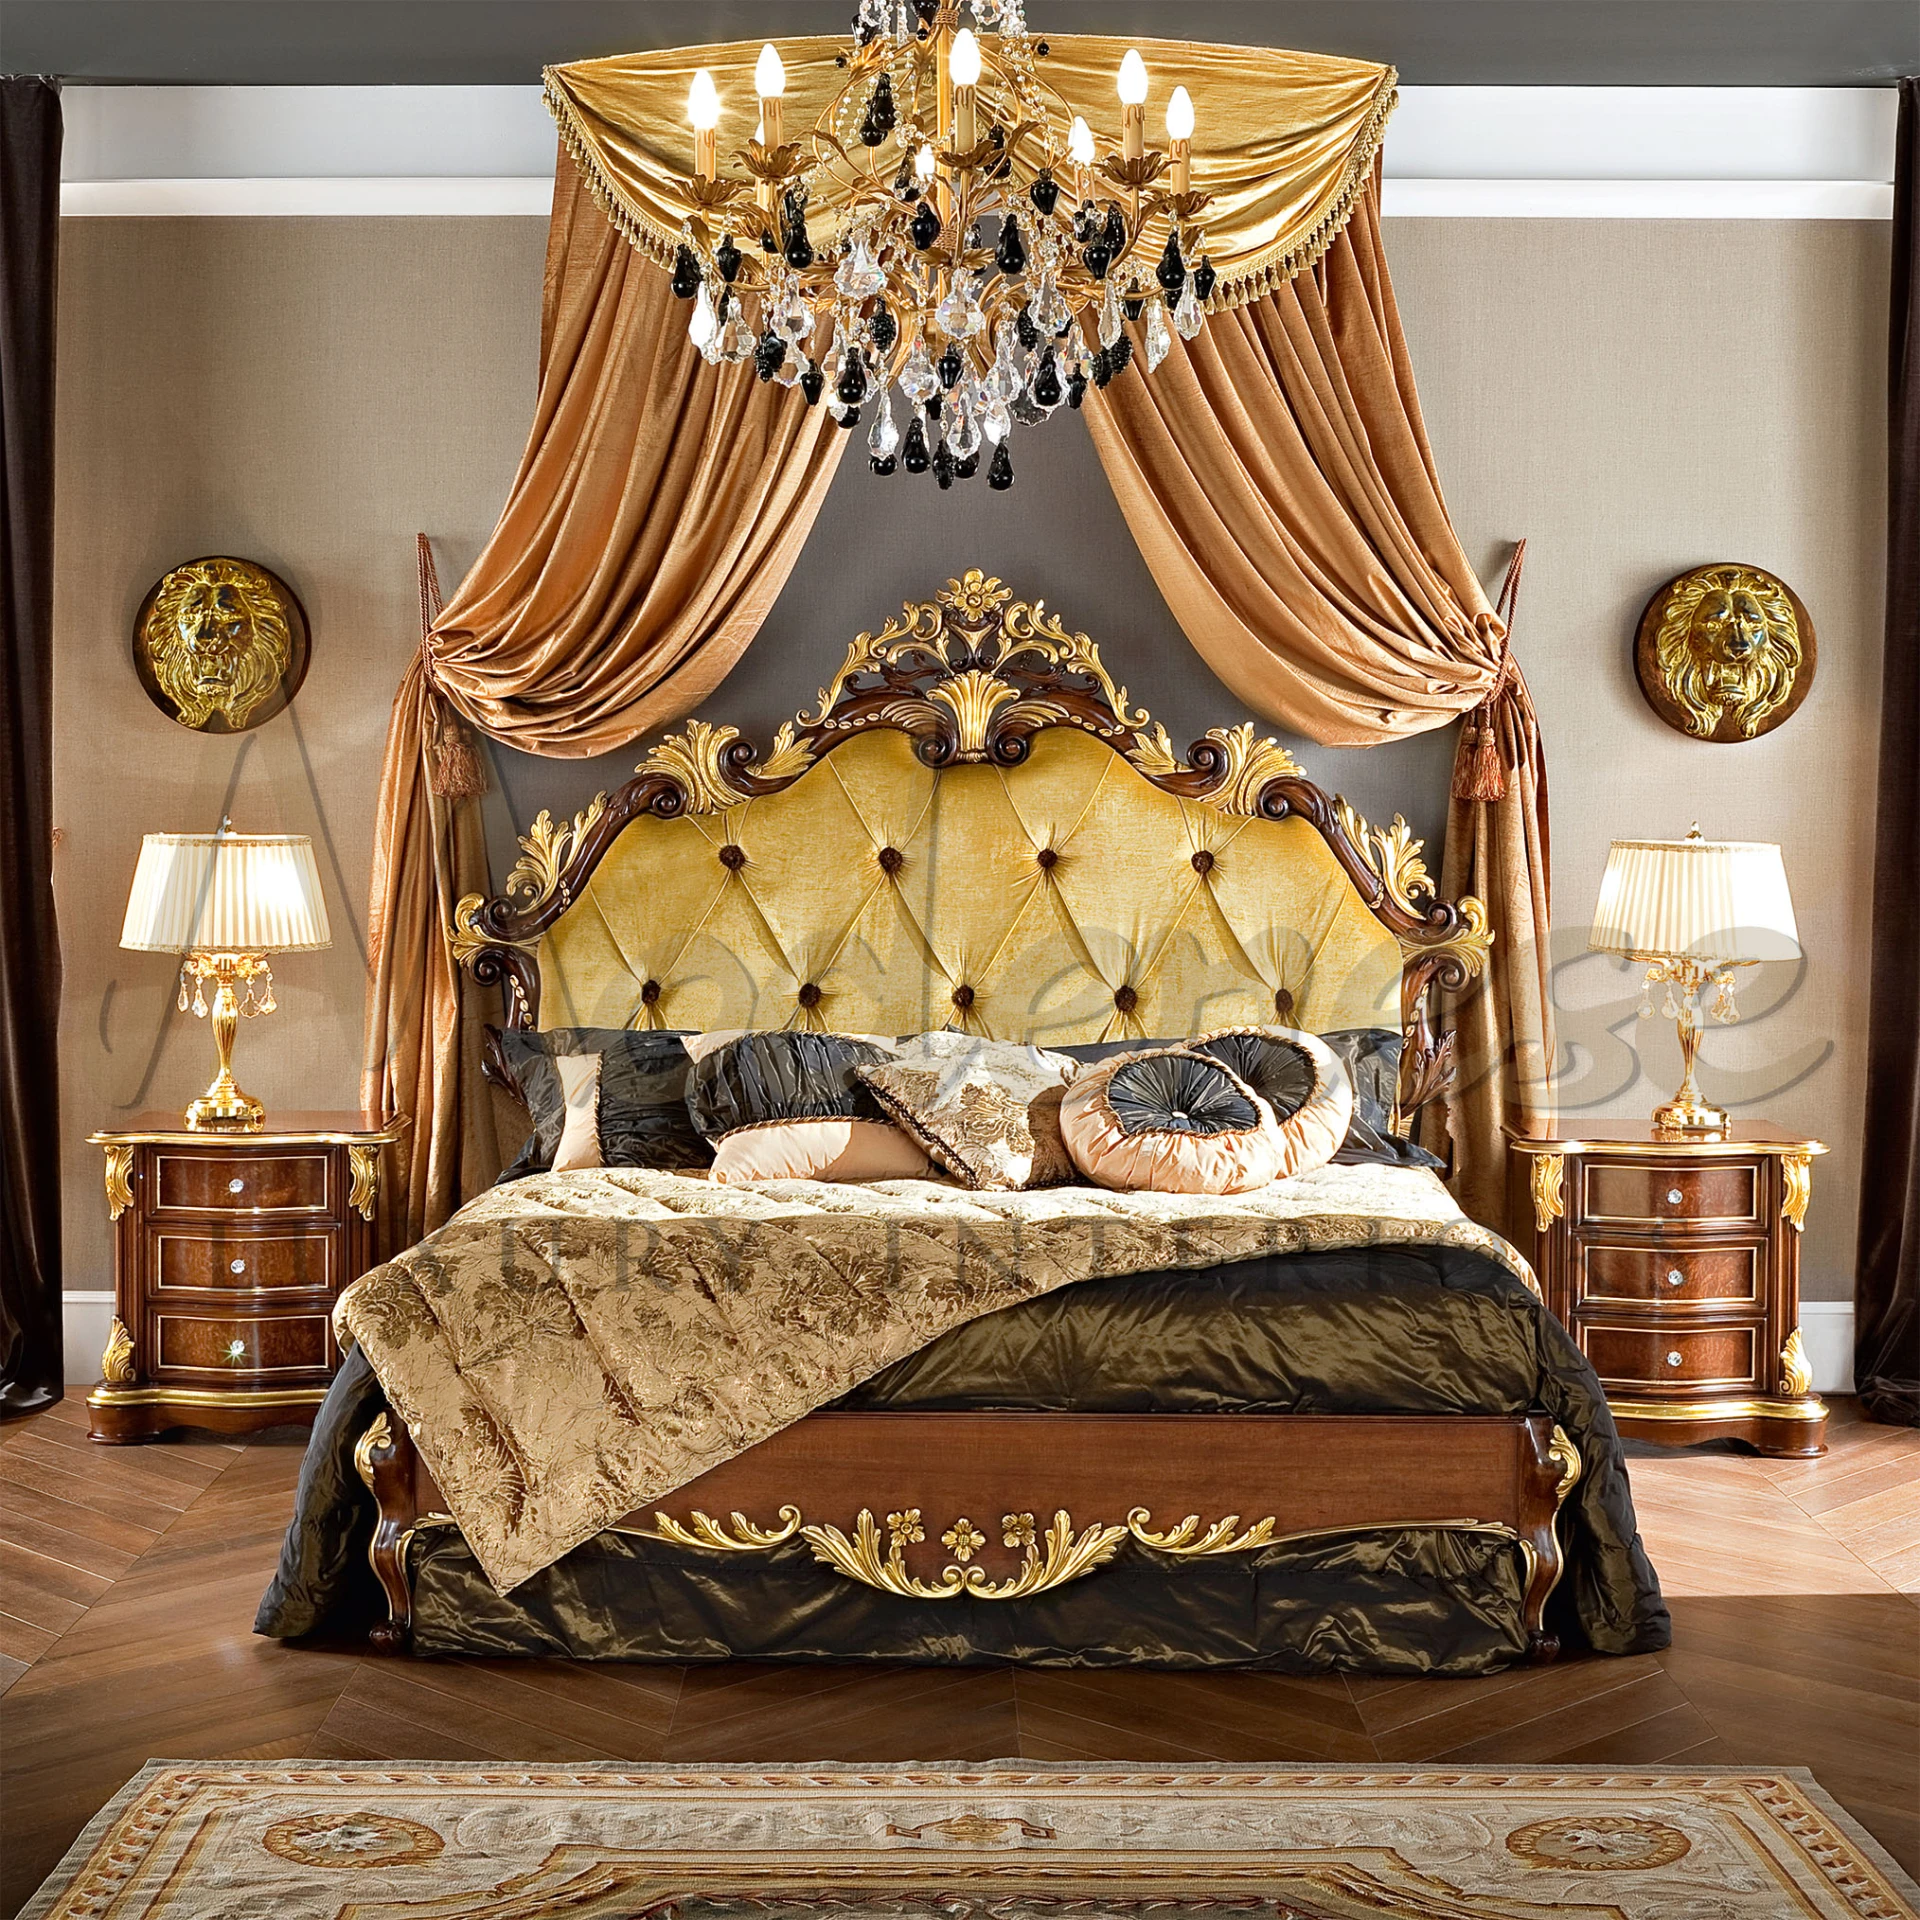 Luxurious bedroom with an ornate golden headboard, elegant chandelier, sumptuous drapes, matching bedside tables with table lamps, and opulent bedding.